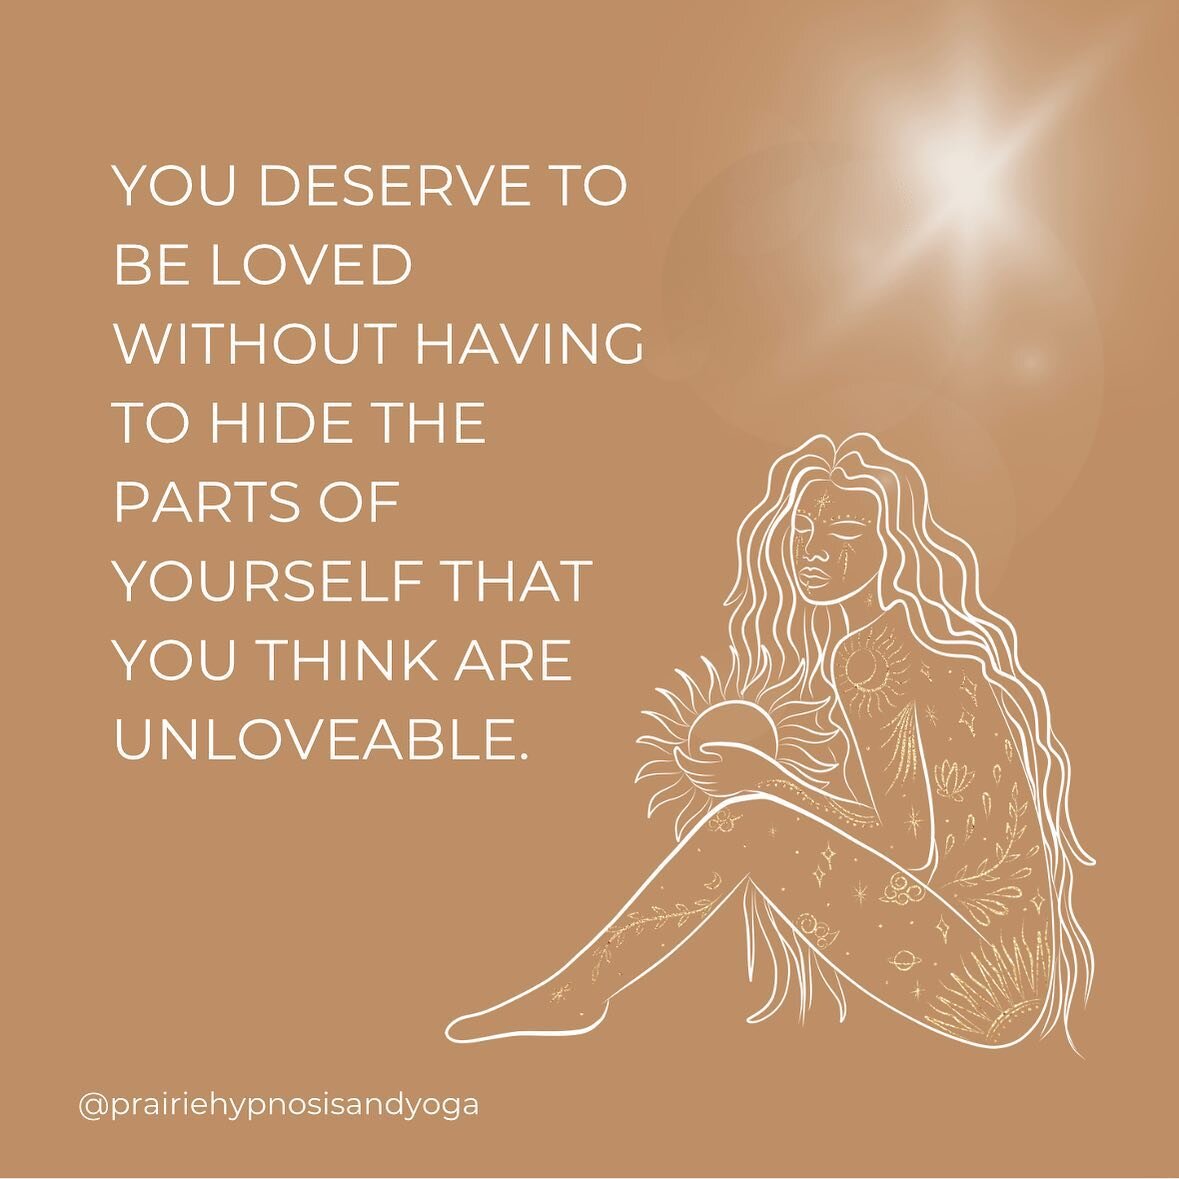 All parts of you deserve to be loved - by others but more importantly yourself! 

When you hide parts of yourself, you are attracting people who only like those parts you do show.

And as time goes on, you either get stuck having to be someone you&rs